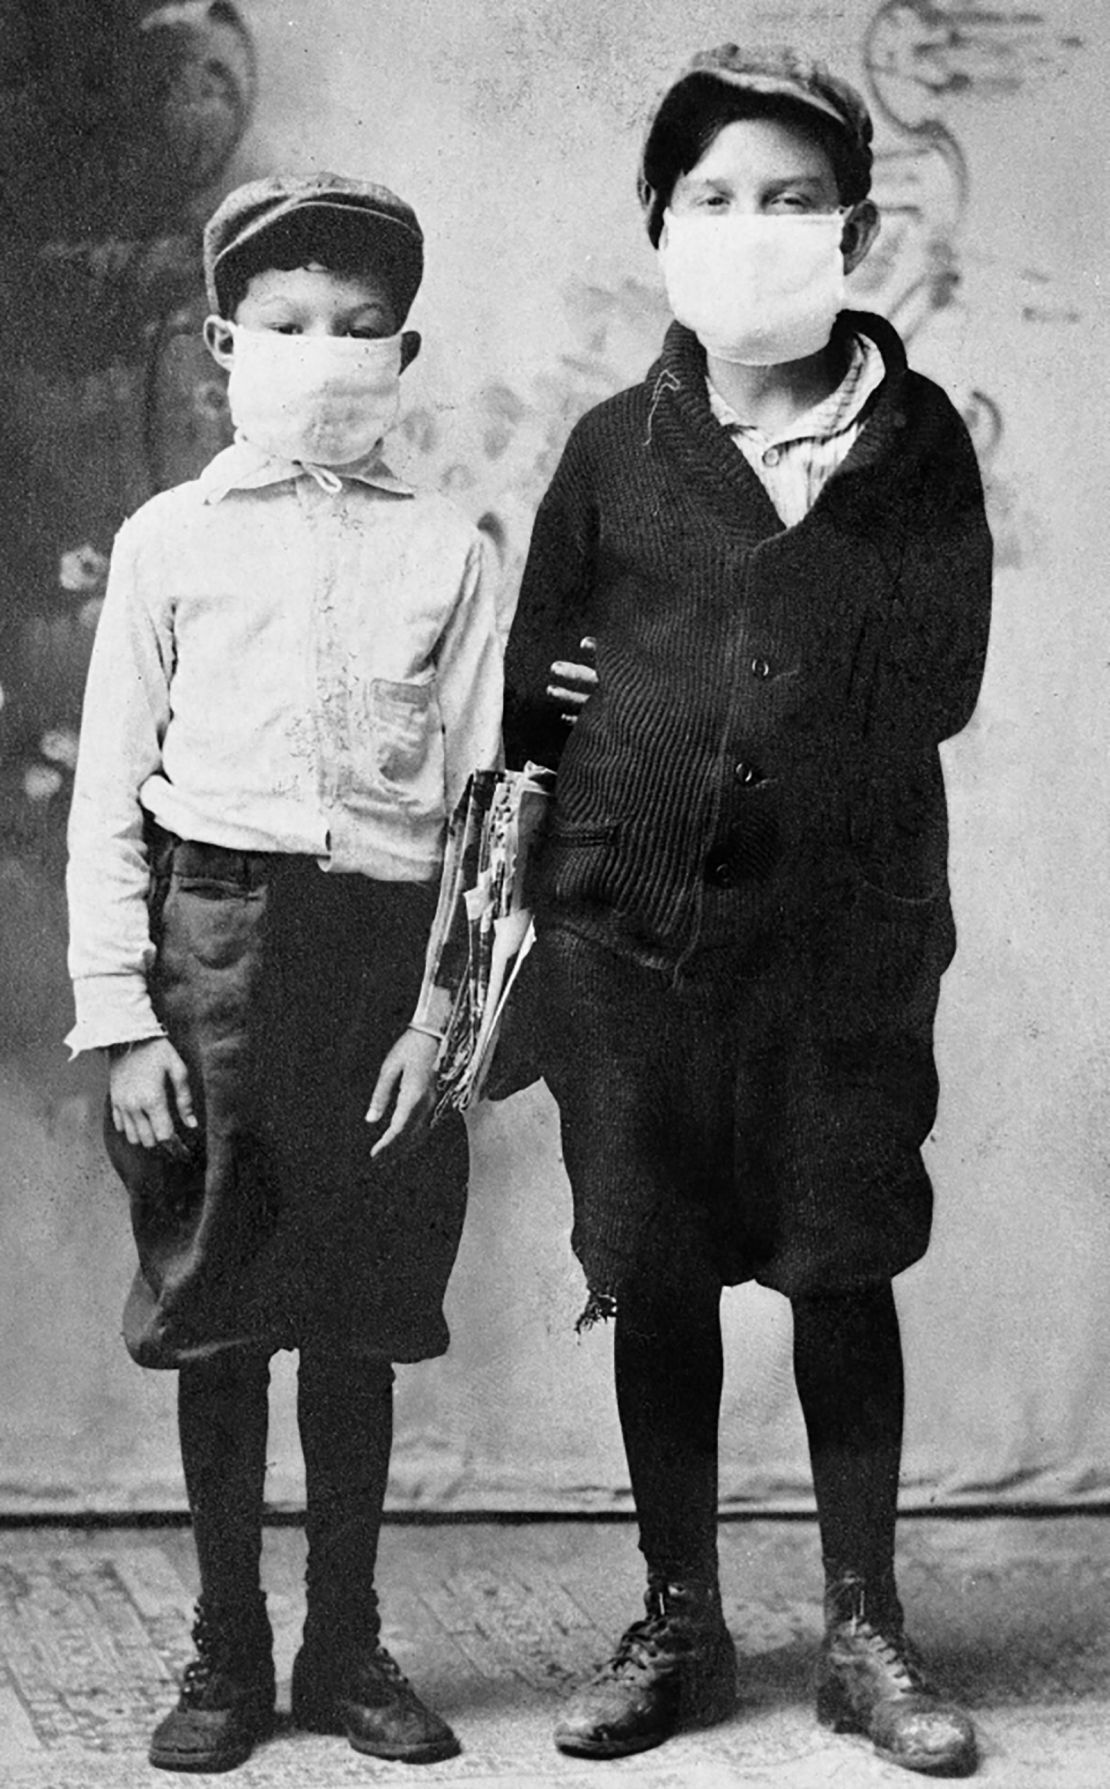 Don Hoover and Joe Sistrunk of Starke, Florida, are ready for school during the 1918 flu outbreak.